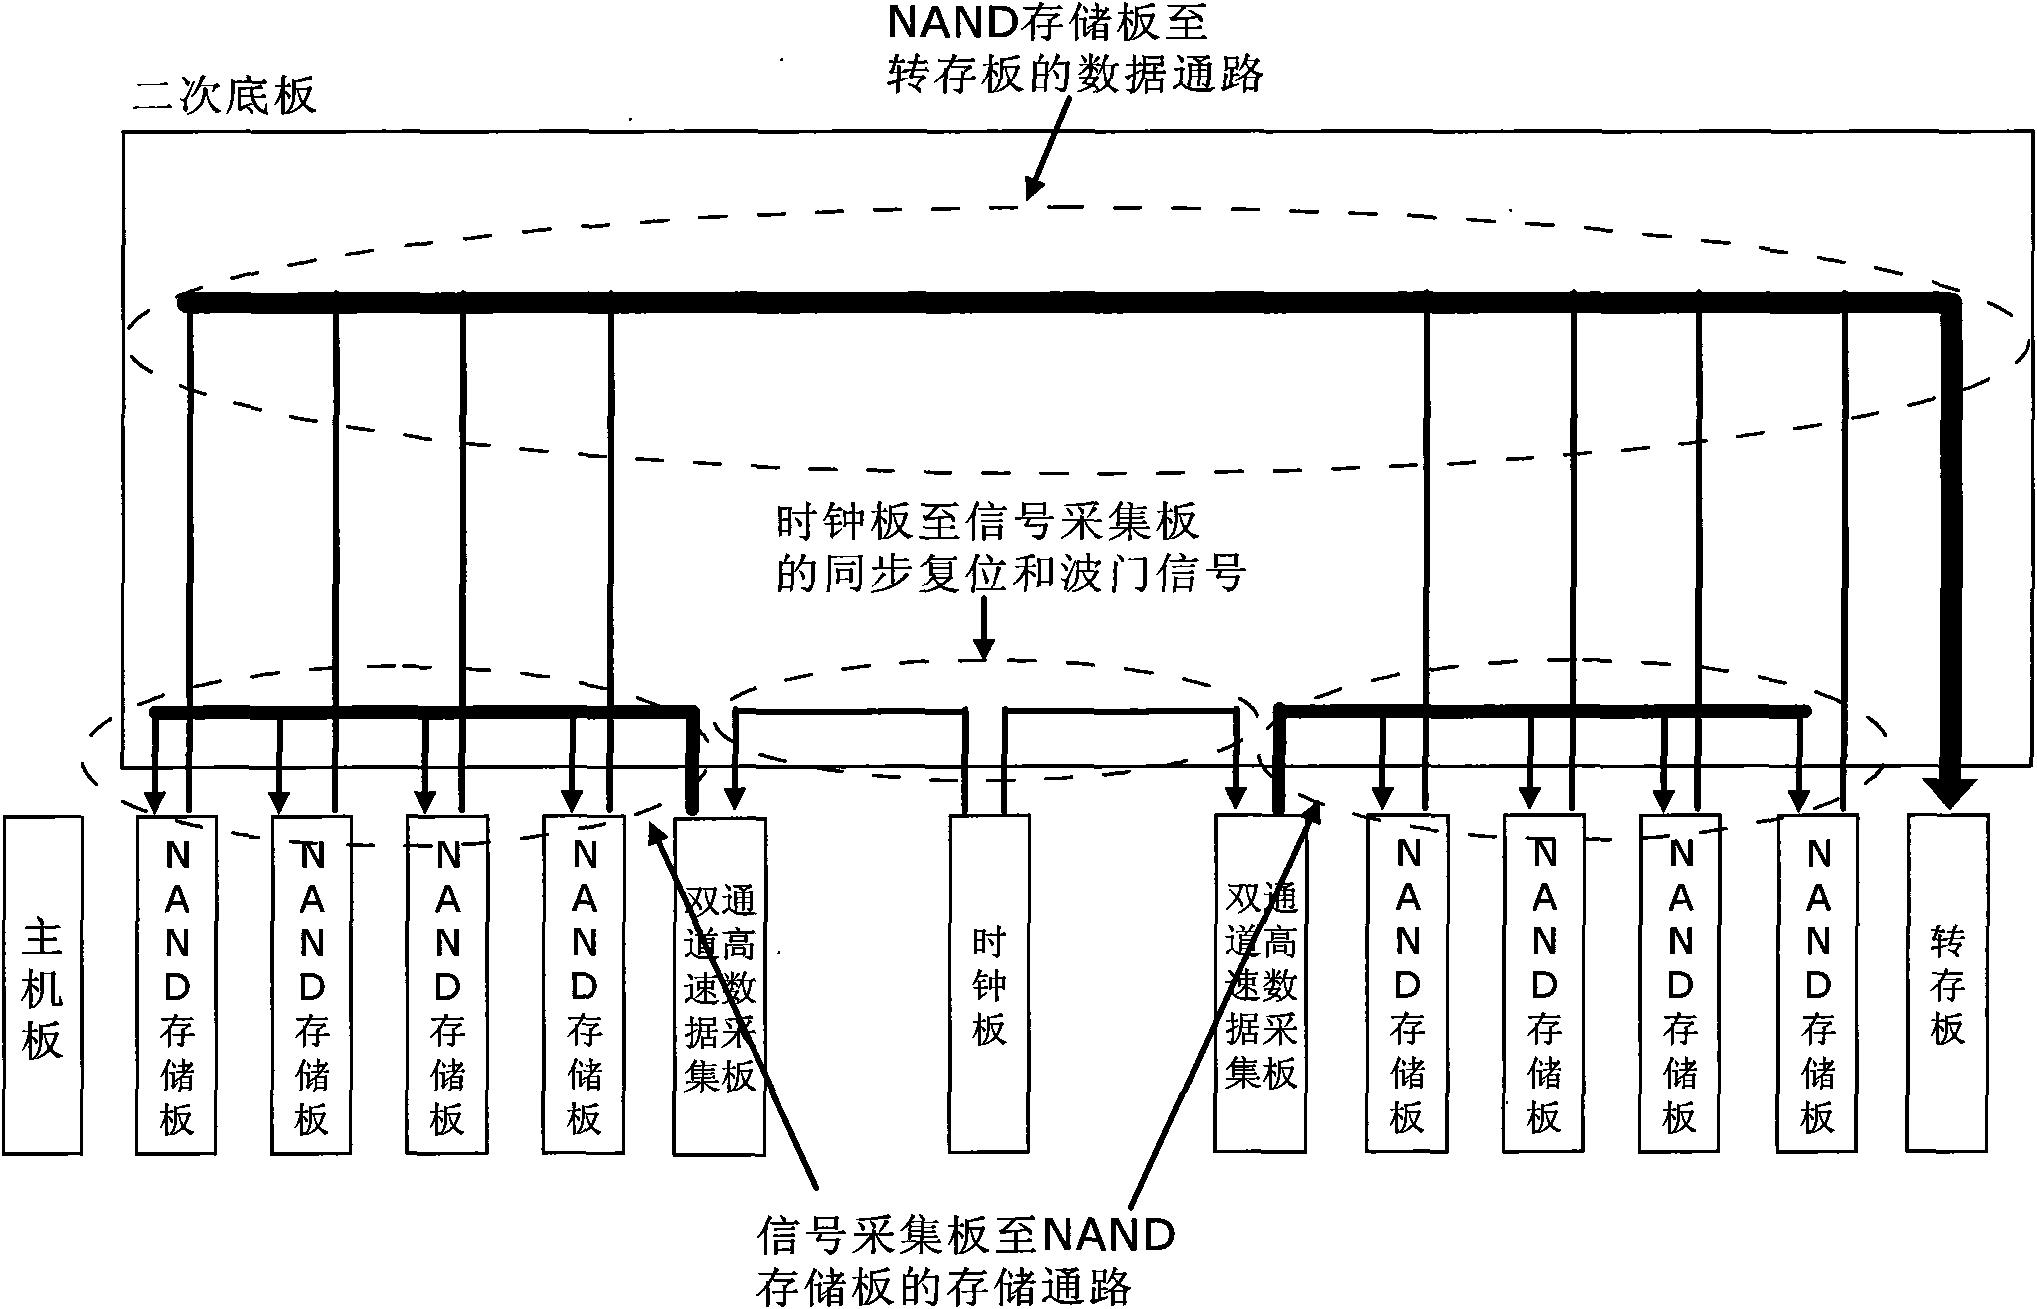 Multi-channel signal acquiring system based on NAND